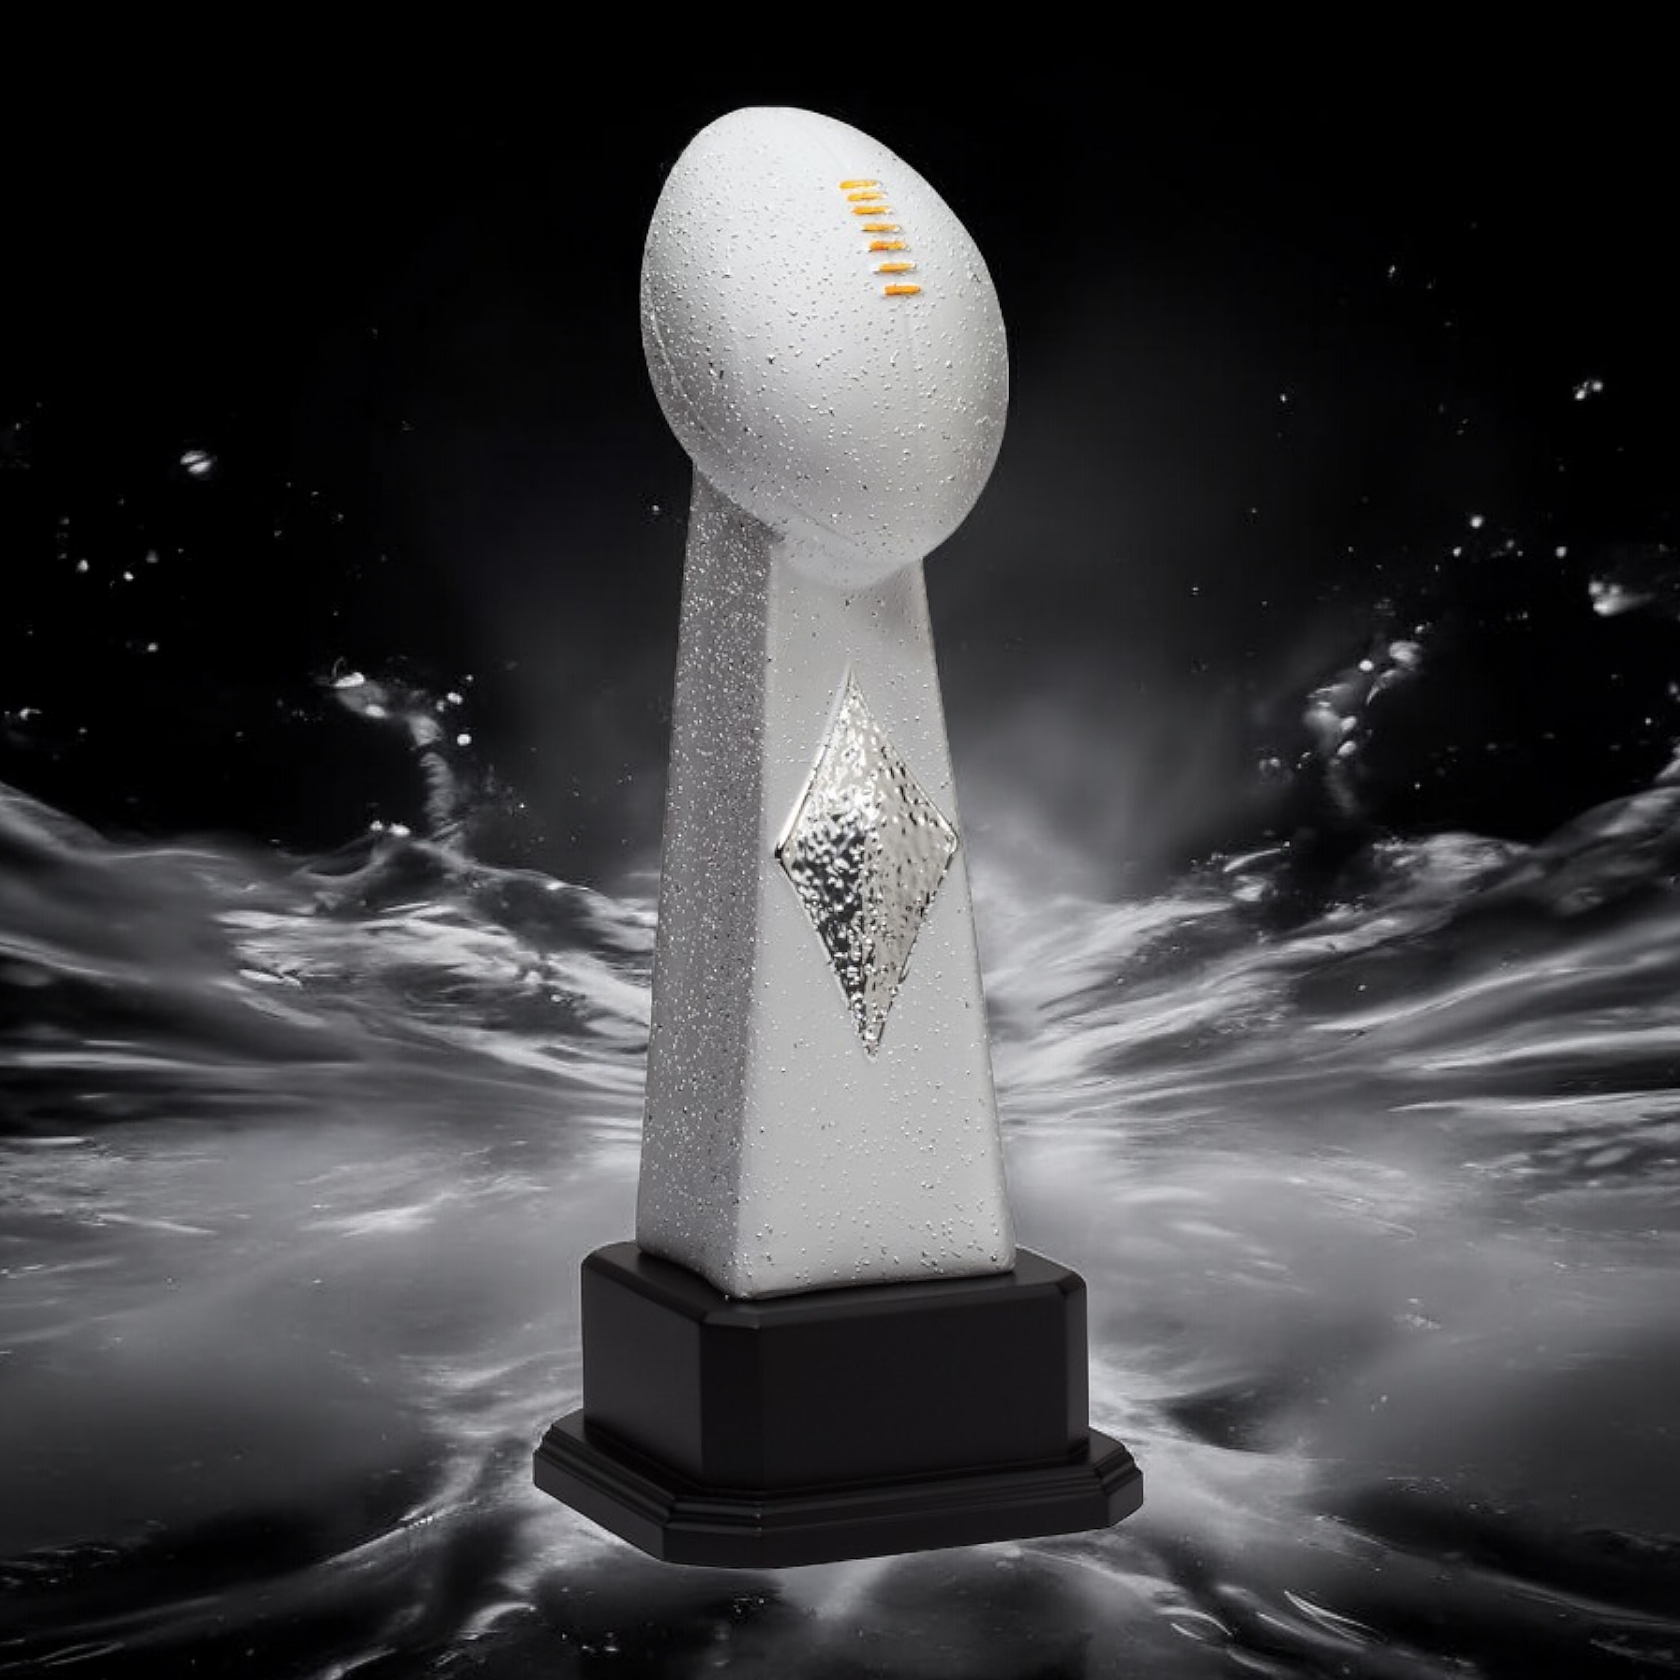 Our Ceramic Football Trophy features a frosted silver imitation Lombardi Trophy. The top features silver football with gold laces. The middle area has a shiny silver diamond. It's all mounted on a black wood base that includes an engraving plate for personalization. The engraving plate is not shown in this photo. The football trophy is displayed on a black area with a computer graphic white water splash. It comes in 3 sizes to choose from: 16", 18.5" & 21.5" tall.